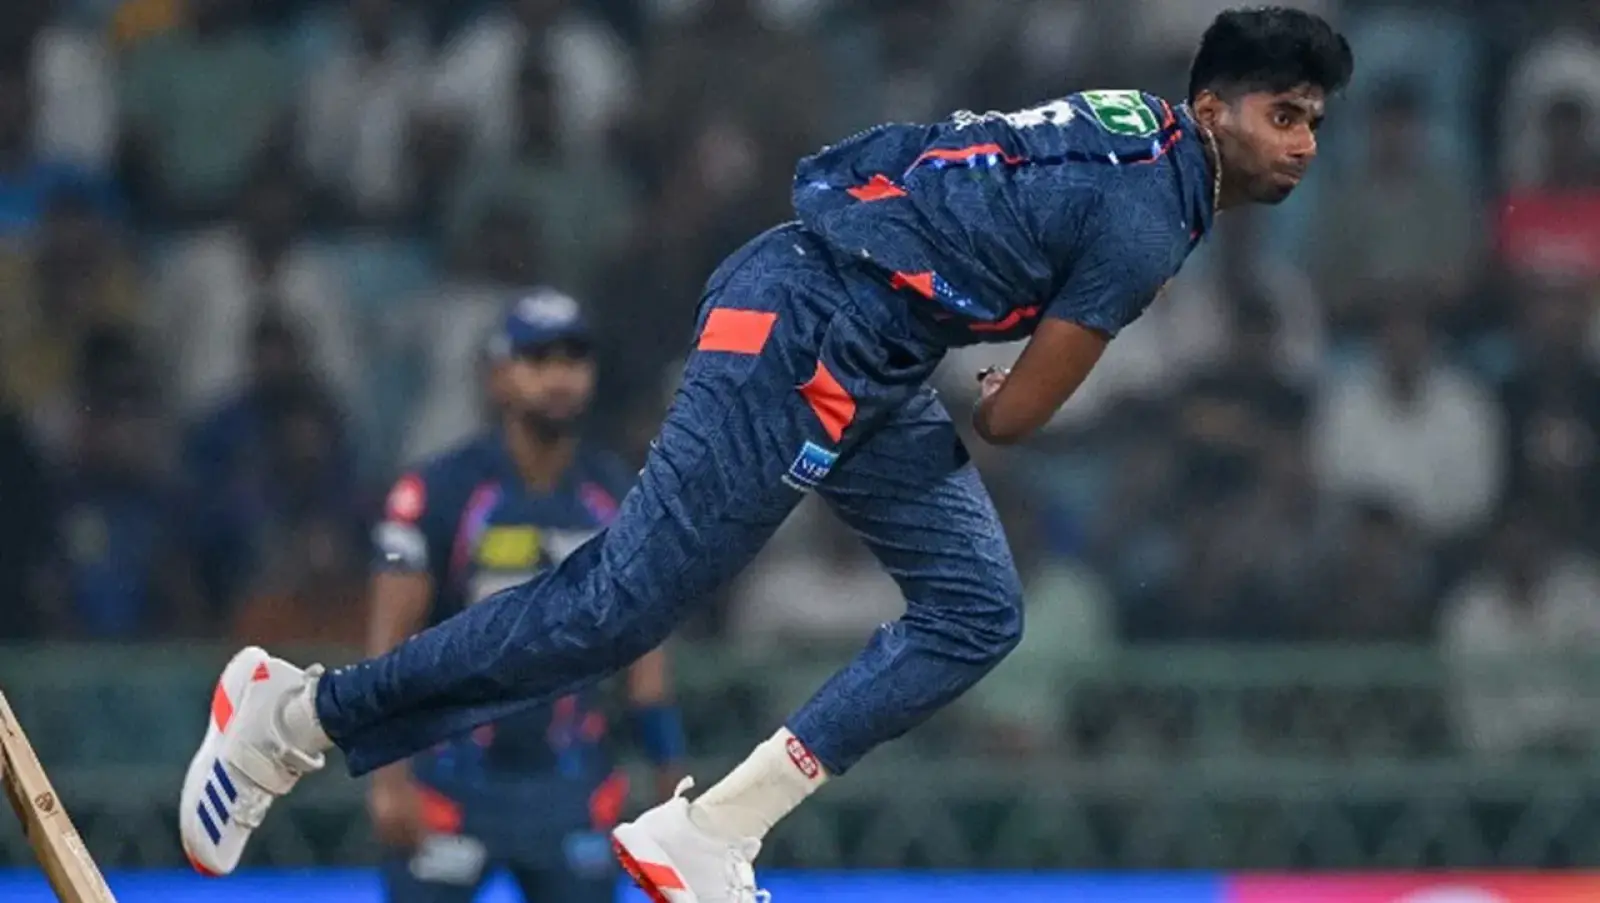 Wreaked havoc in IPL debut with a speed of 155.8 km, know who is India's young pacer Mayank Yadav